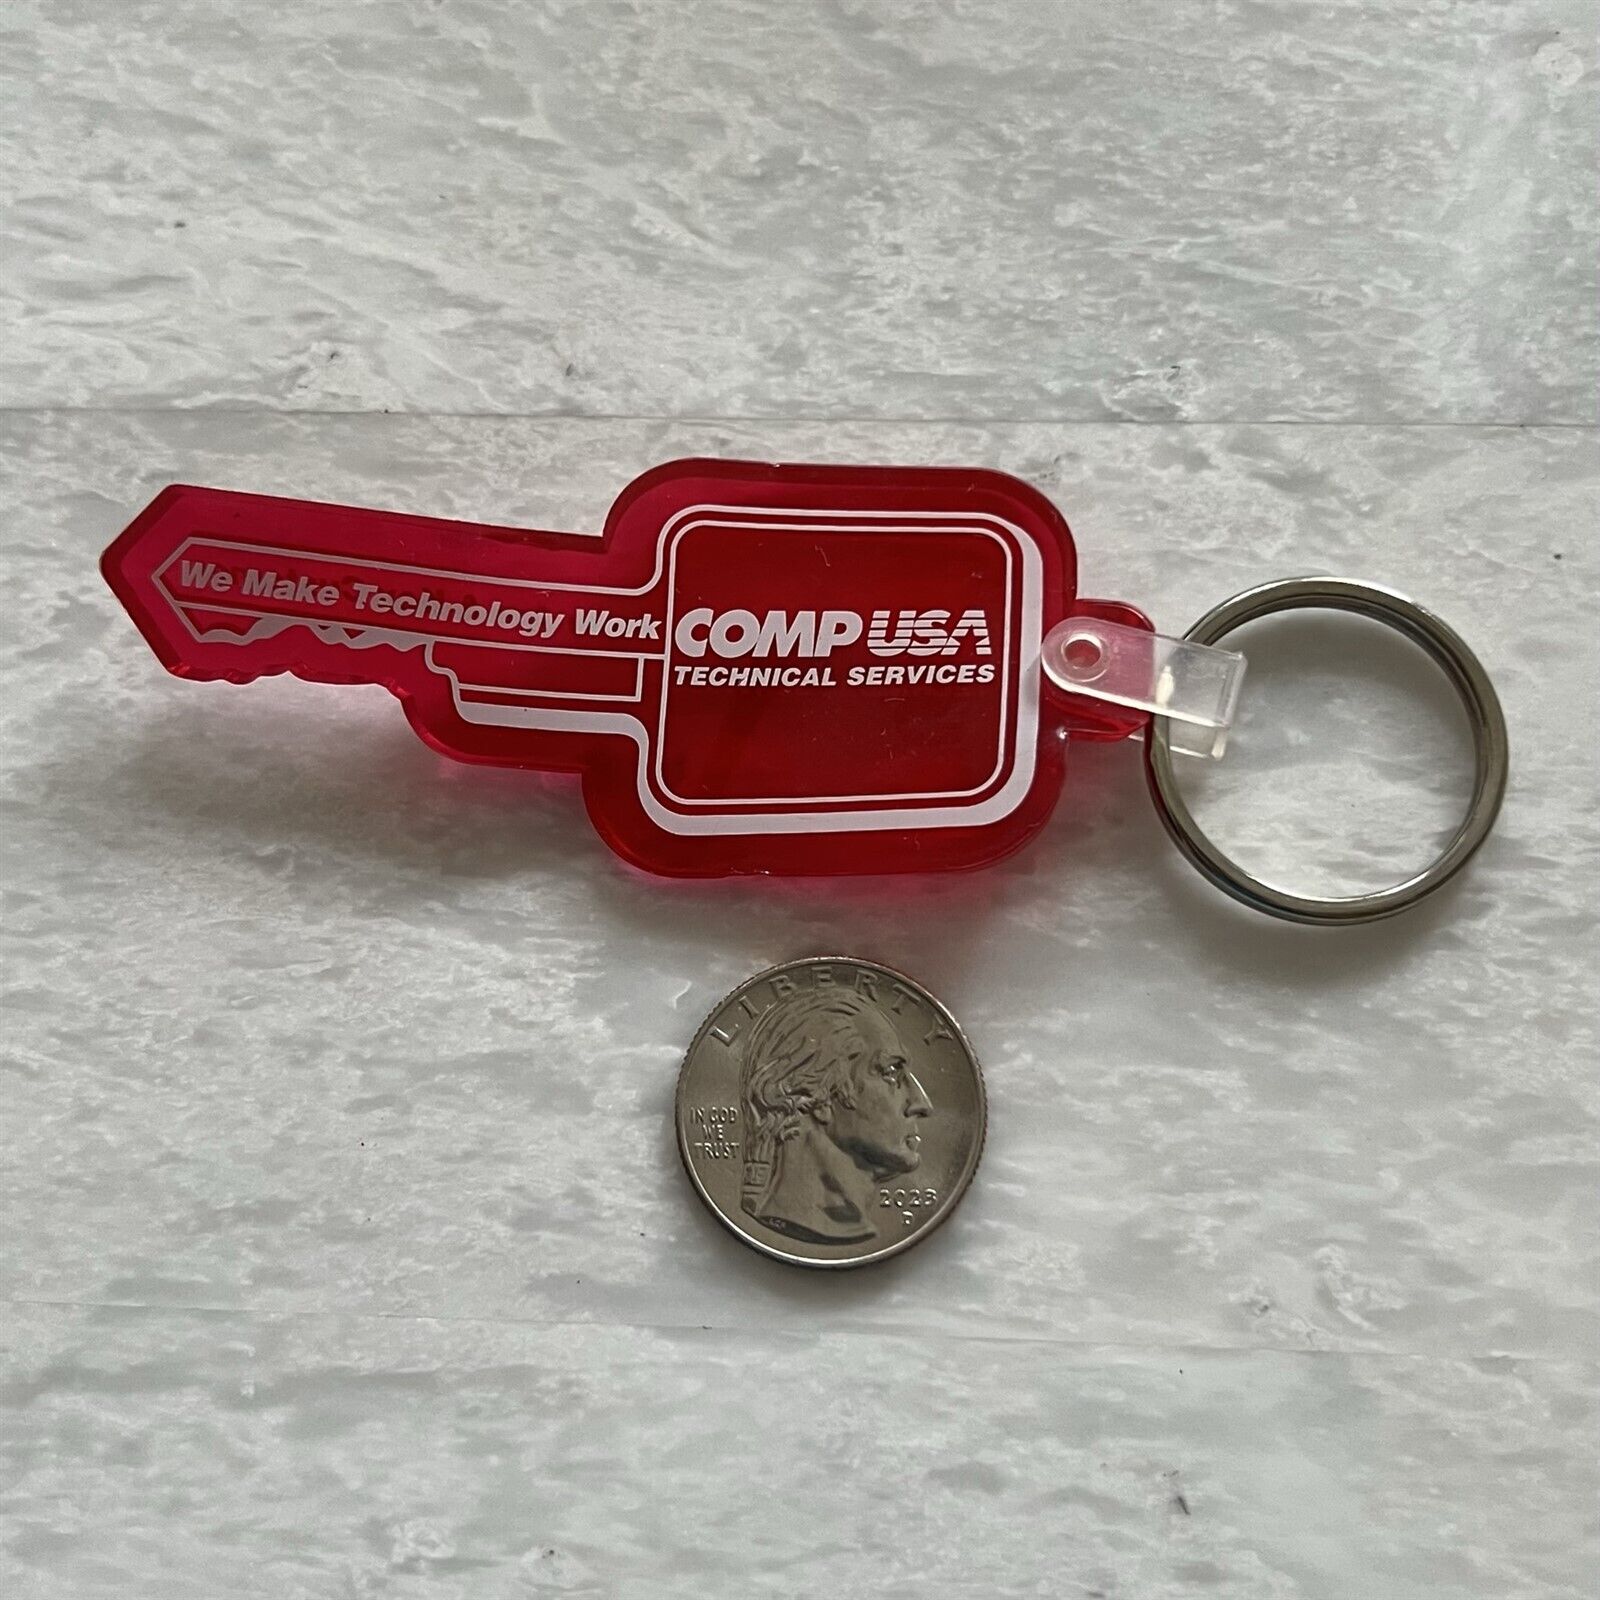 Vintage COMPUSA Comp USA Technical Services Keychain Key Ring #44038